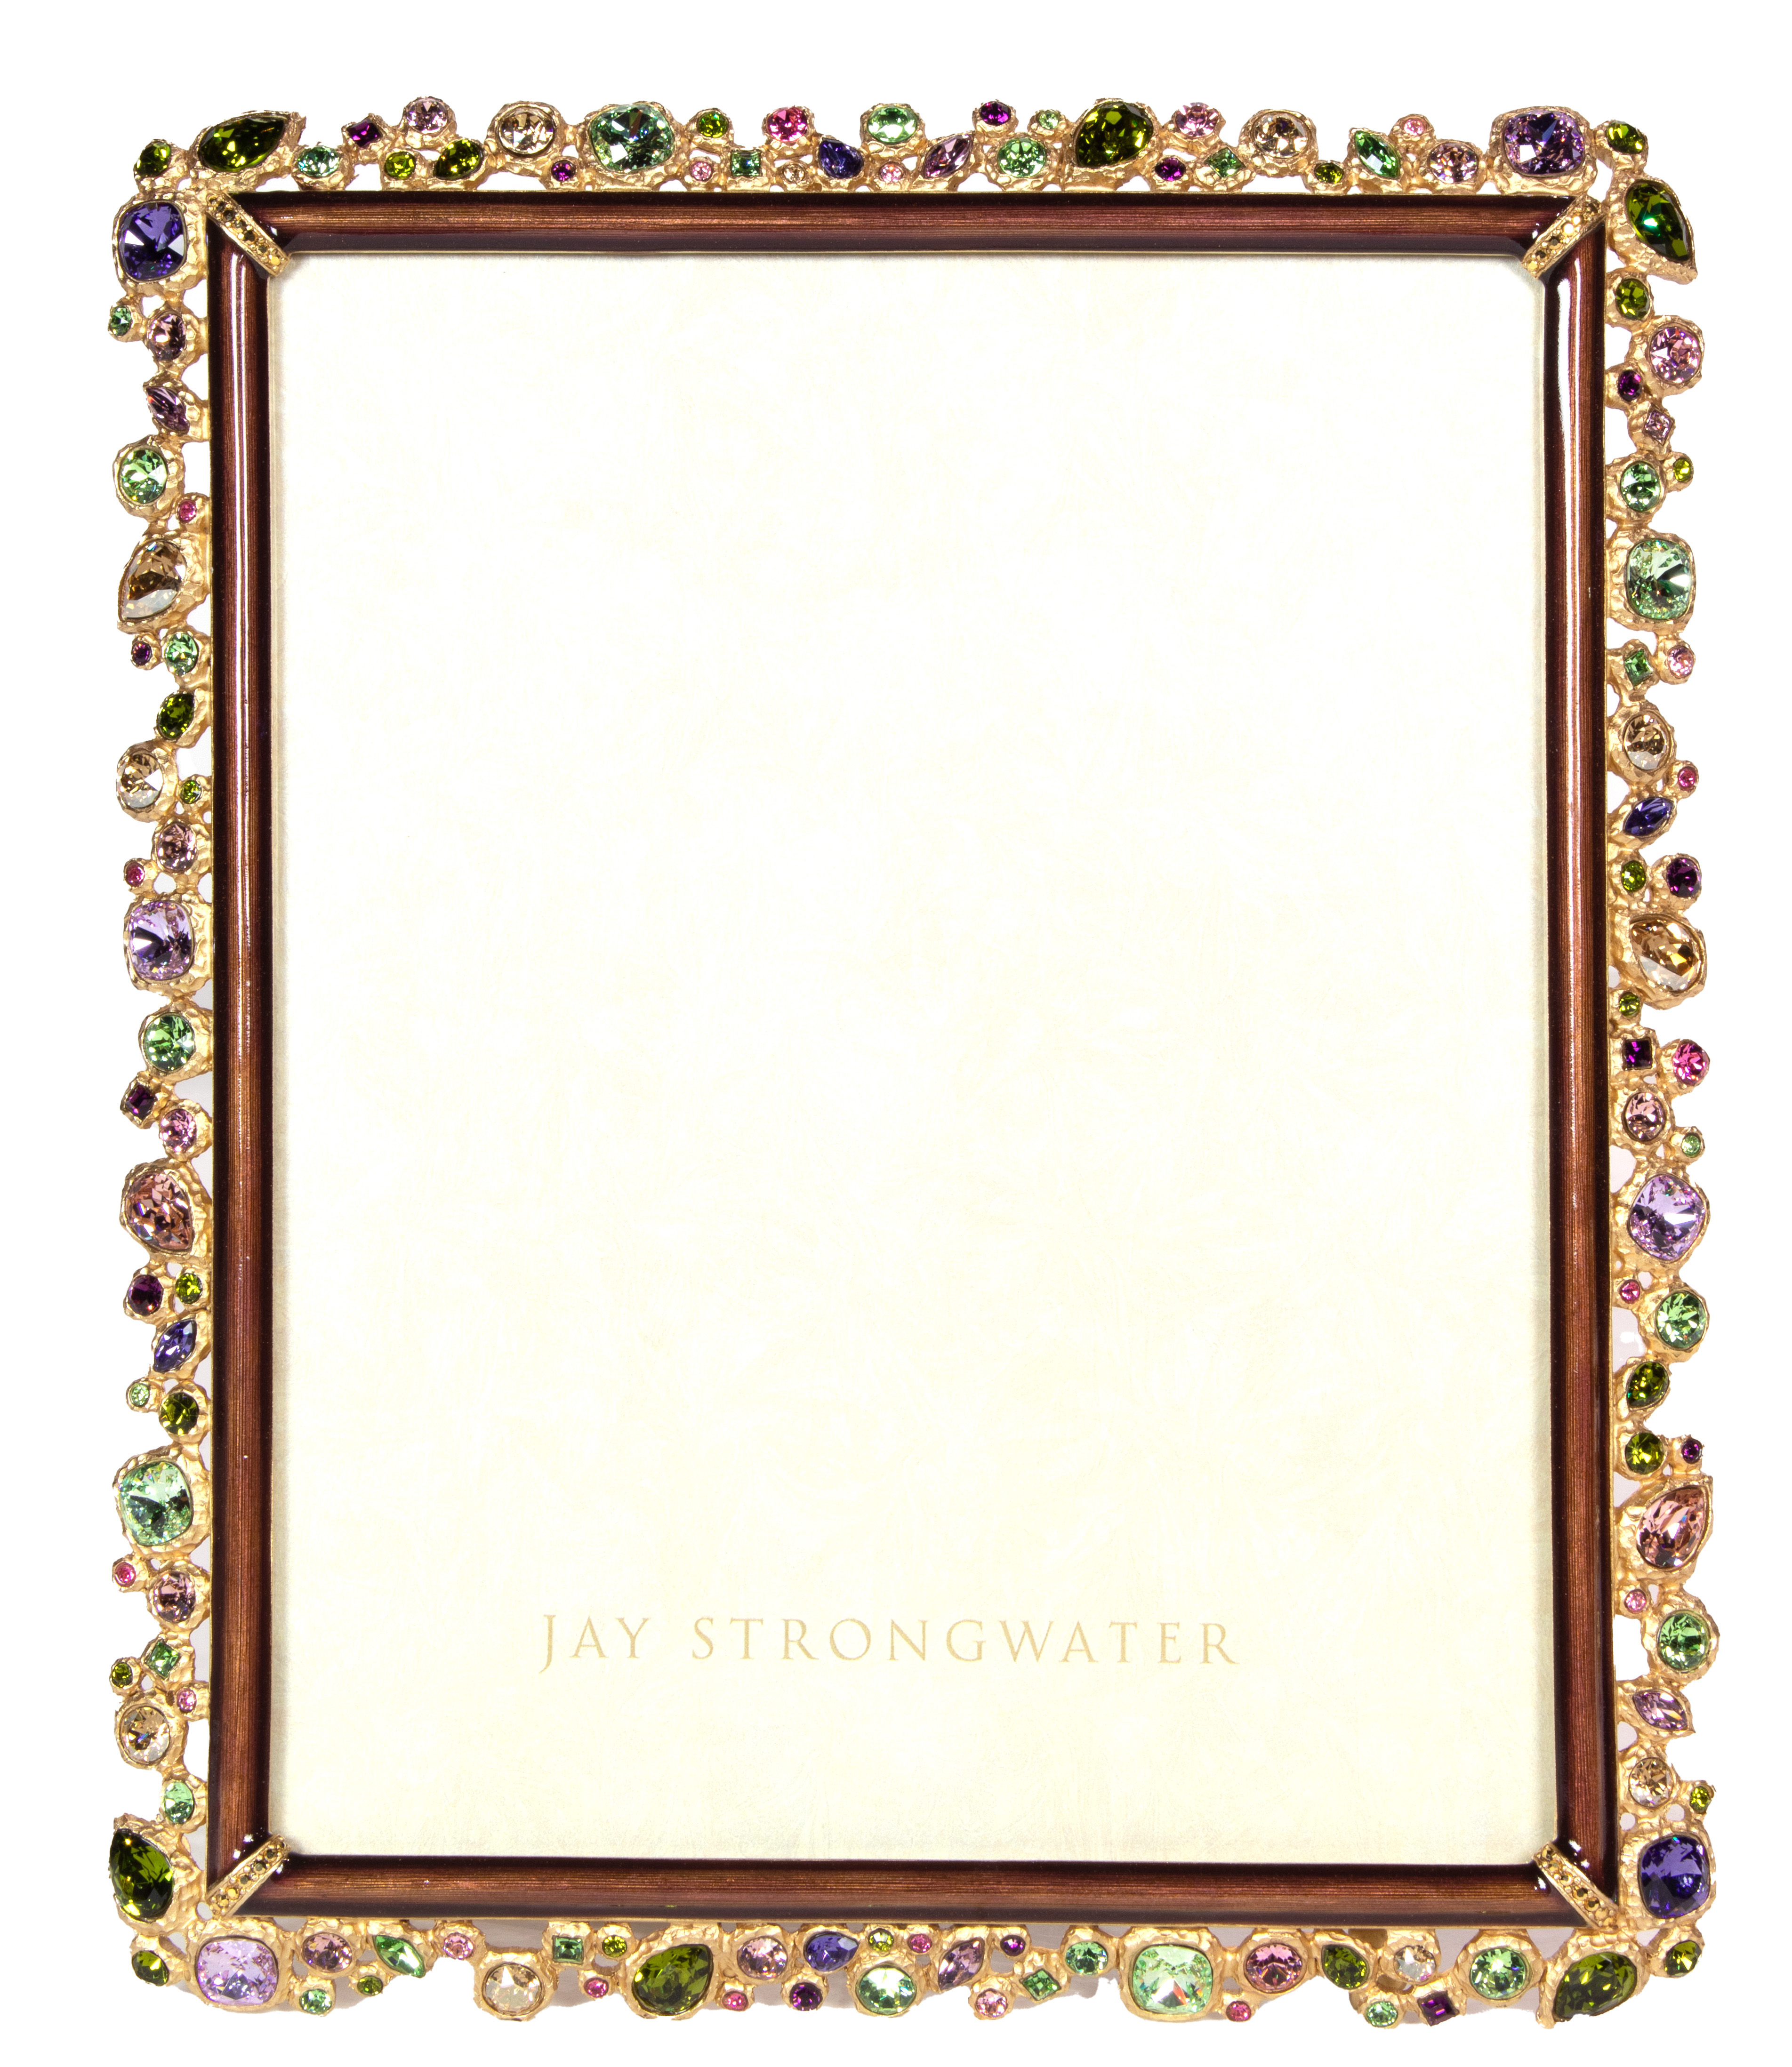 A JAY STRONGWATER THEO BEJEWELED 3a3419